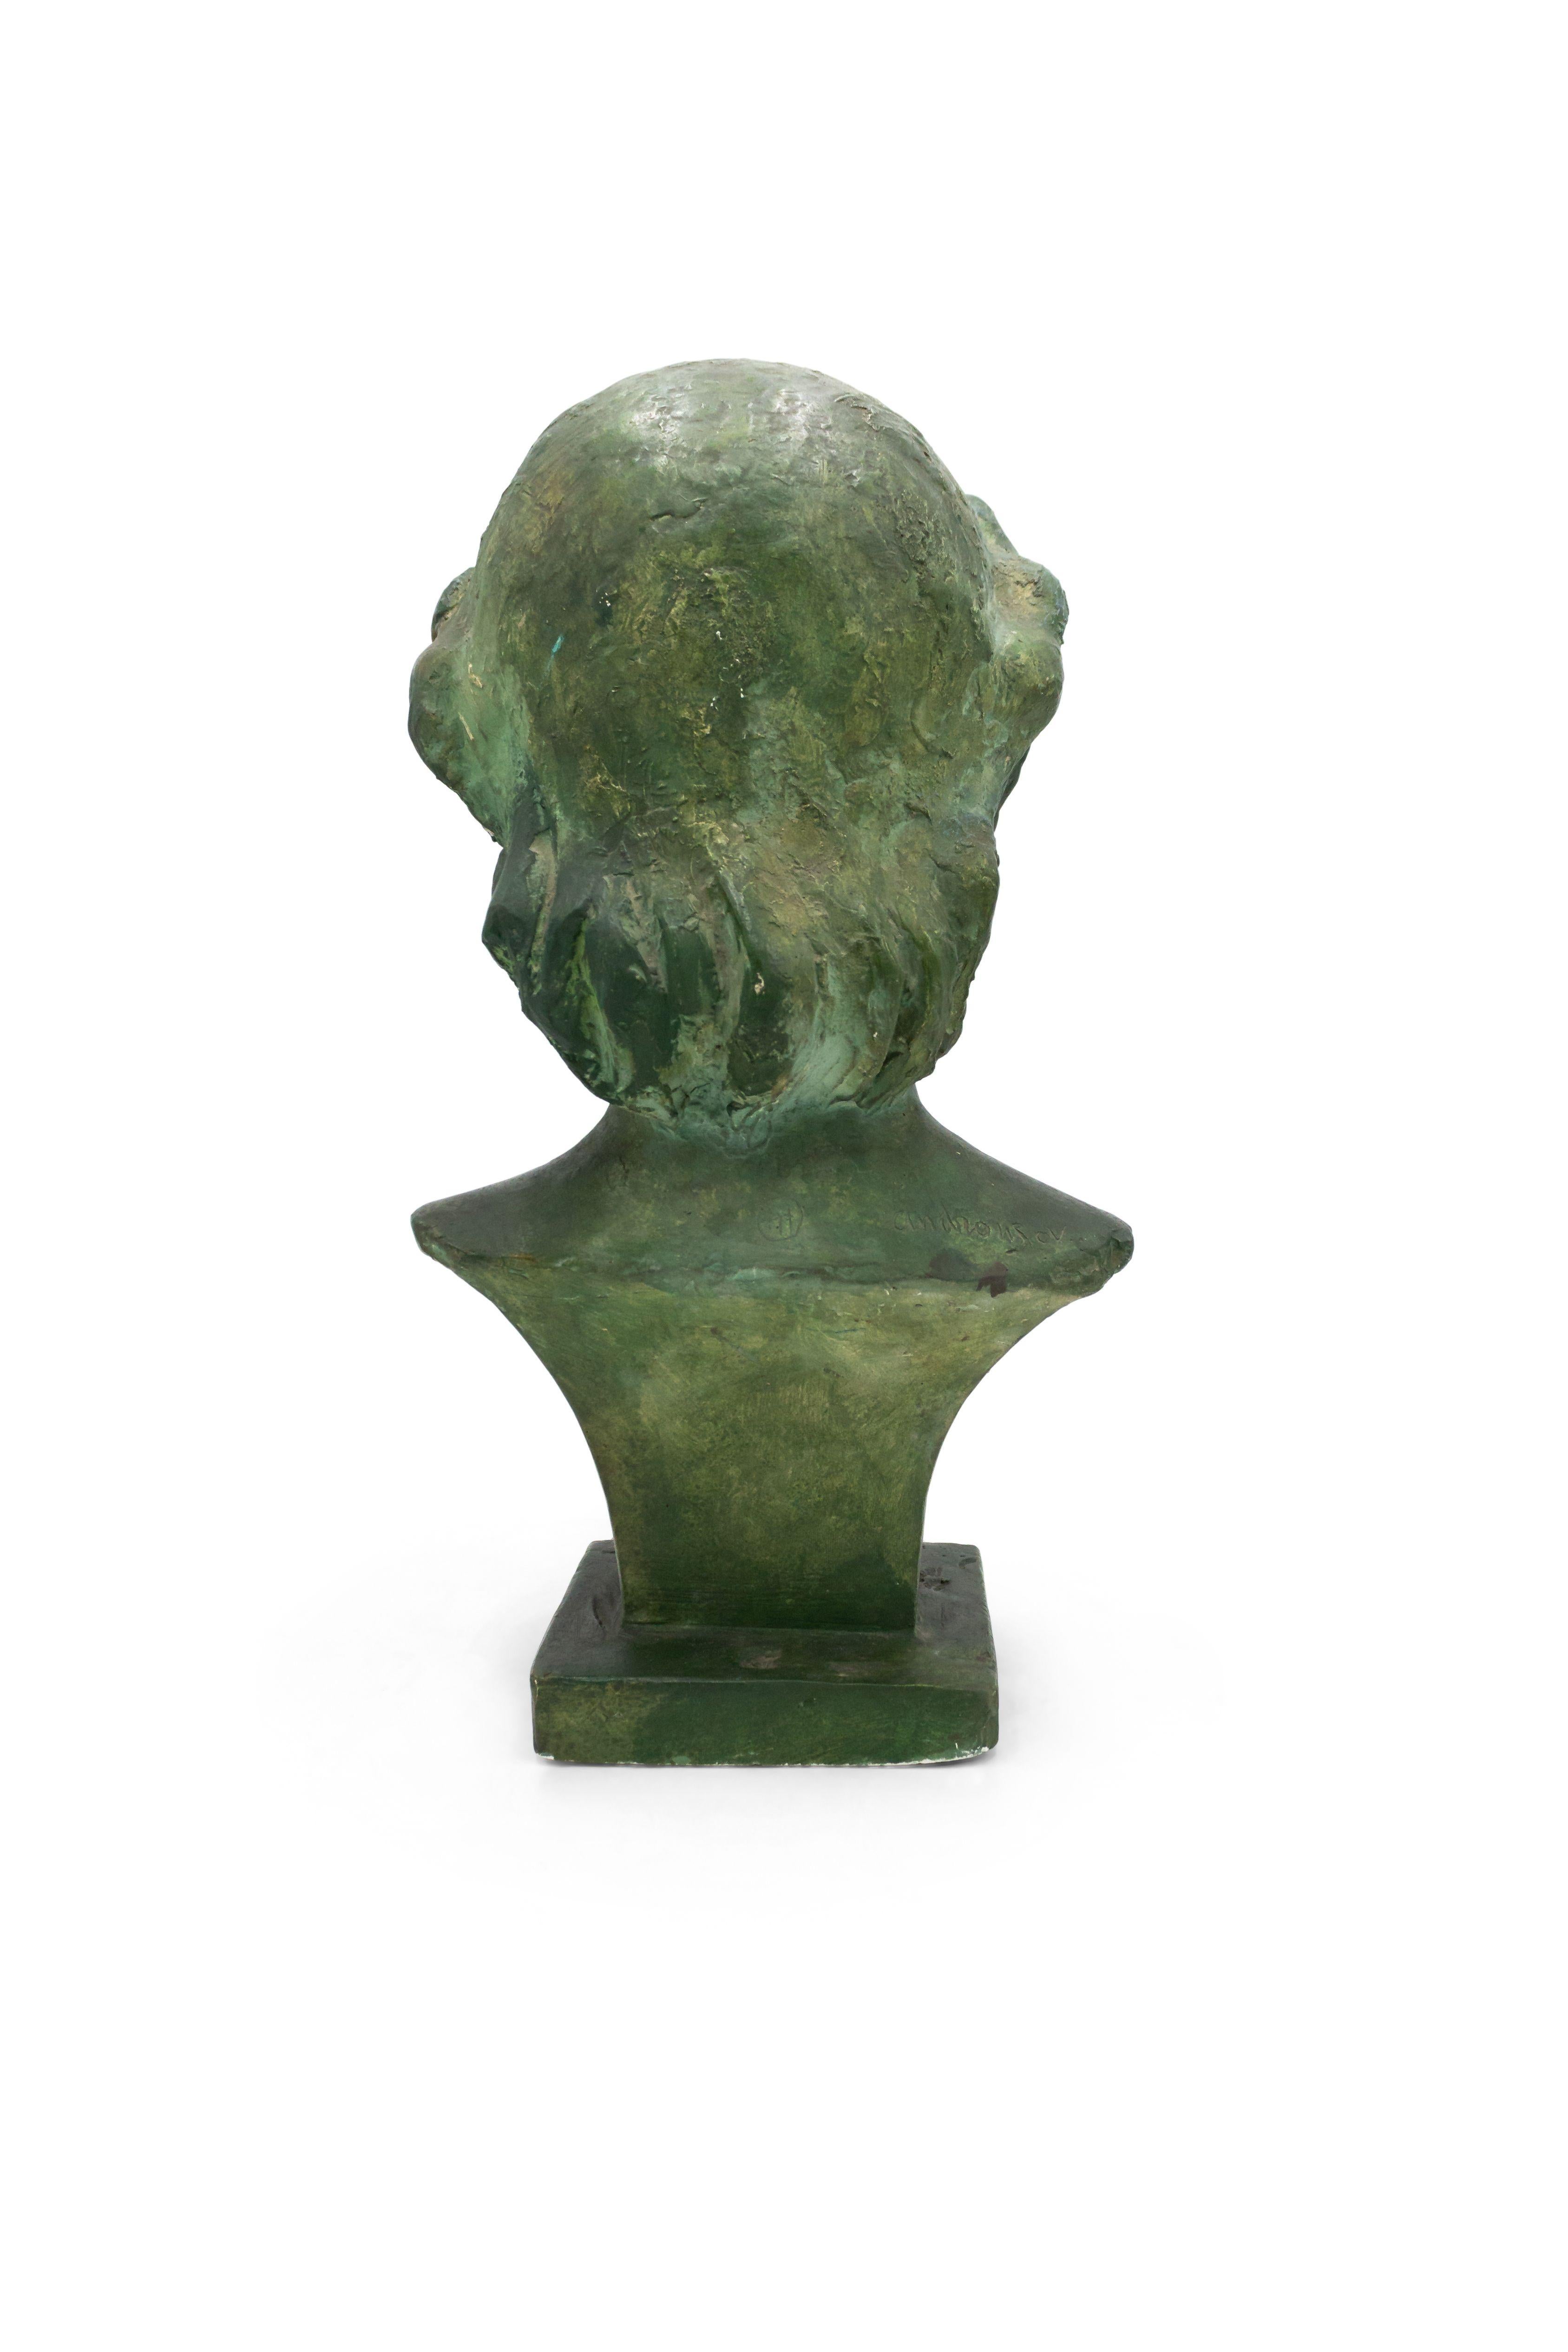 20th Century French Art Deco Patina Lady Busts For Sale